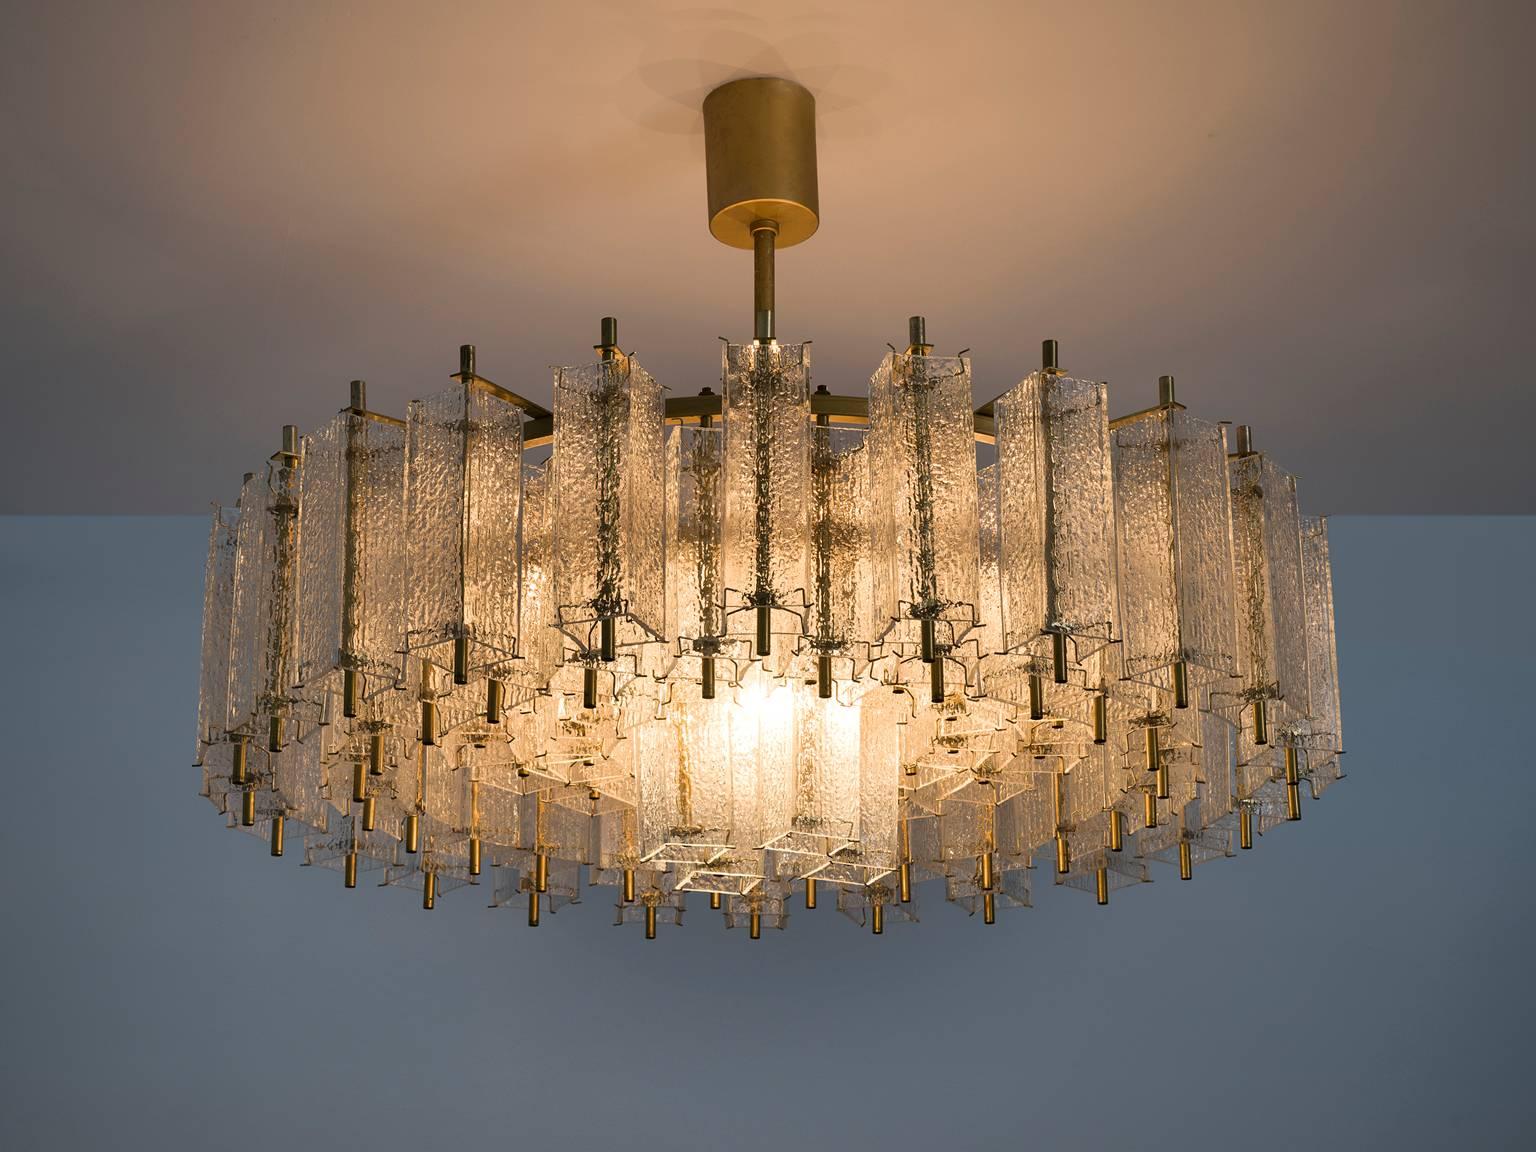 Chandelier, in glass and brass, Europe, 1970s. 

Large circular 120 cm chandelier with a great amount of glass shades. The frame is made of brass and holds numerous structured glass 'tubes' with a brass centre. Due the combination of materials and